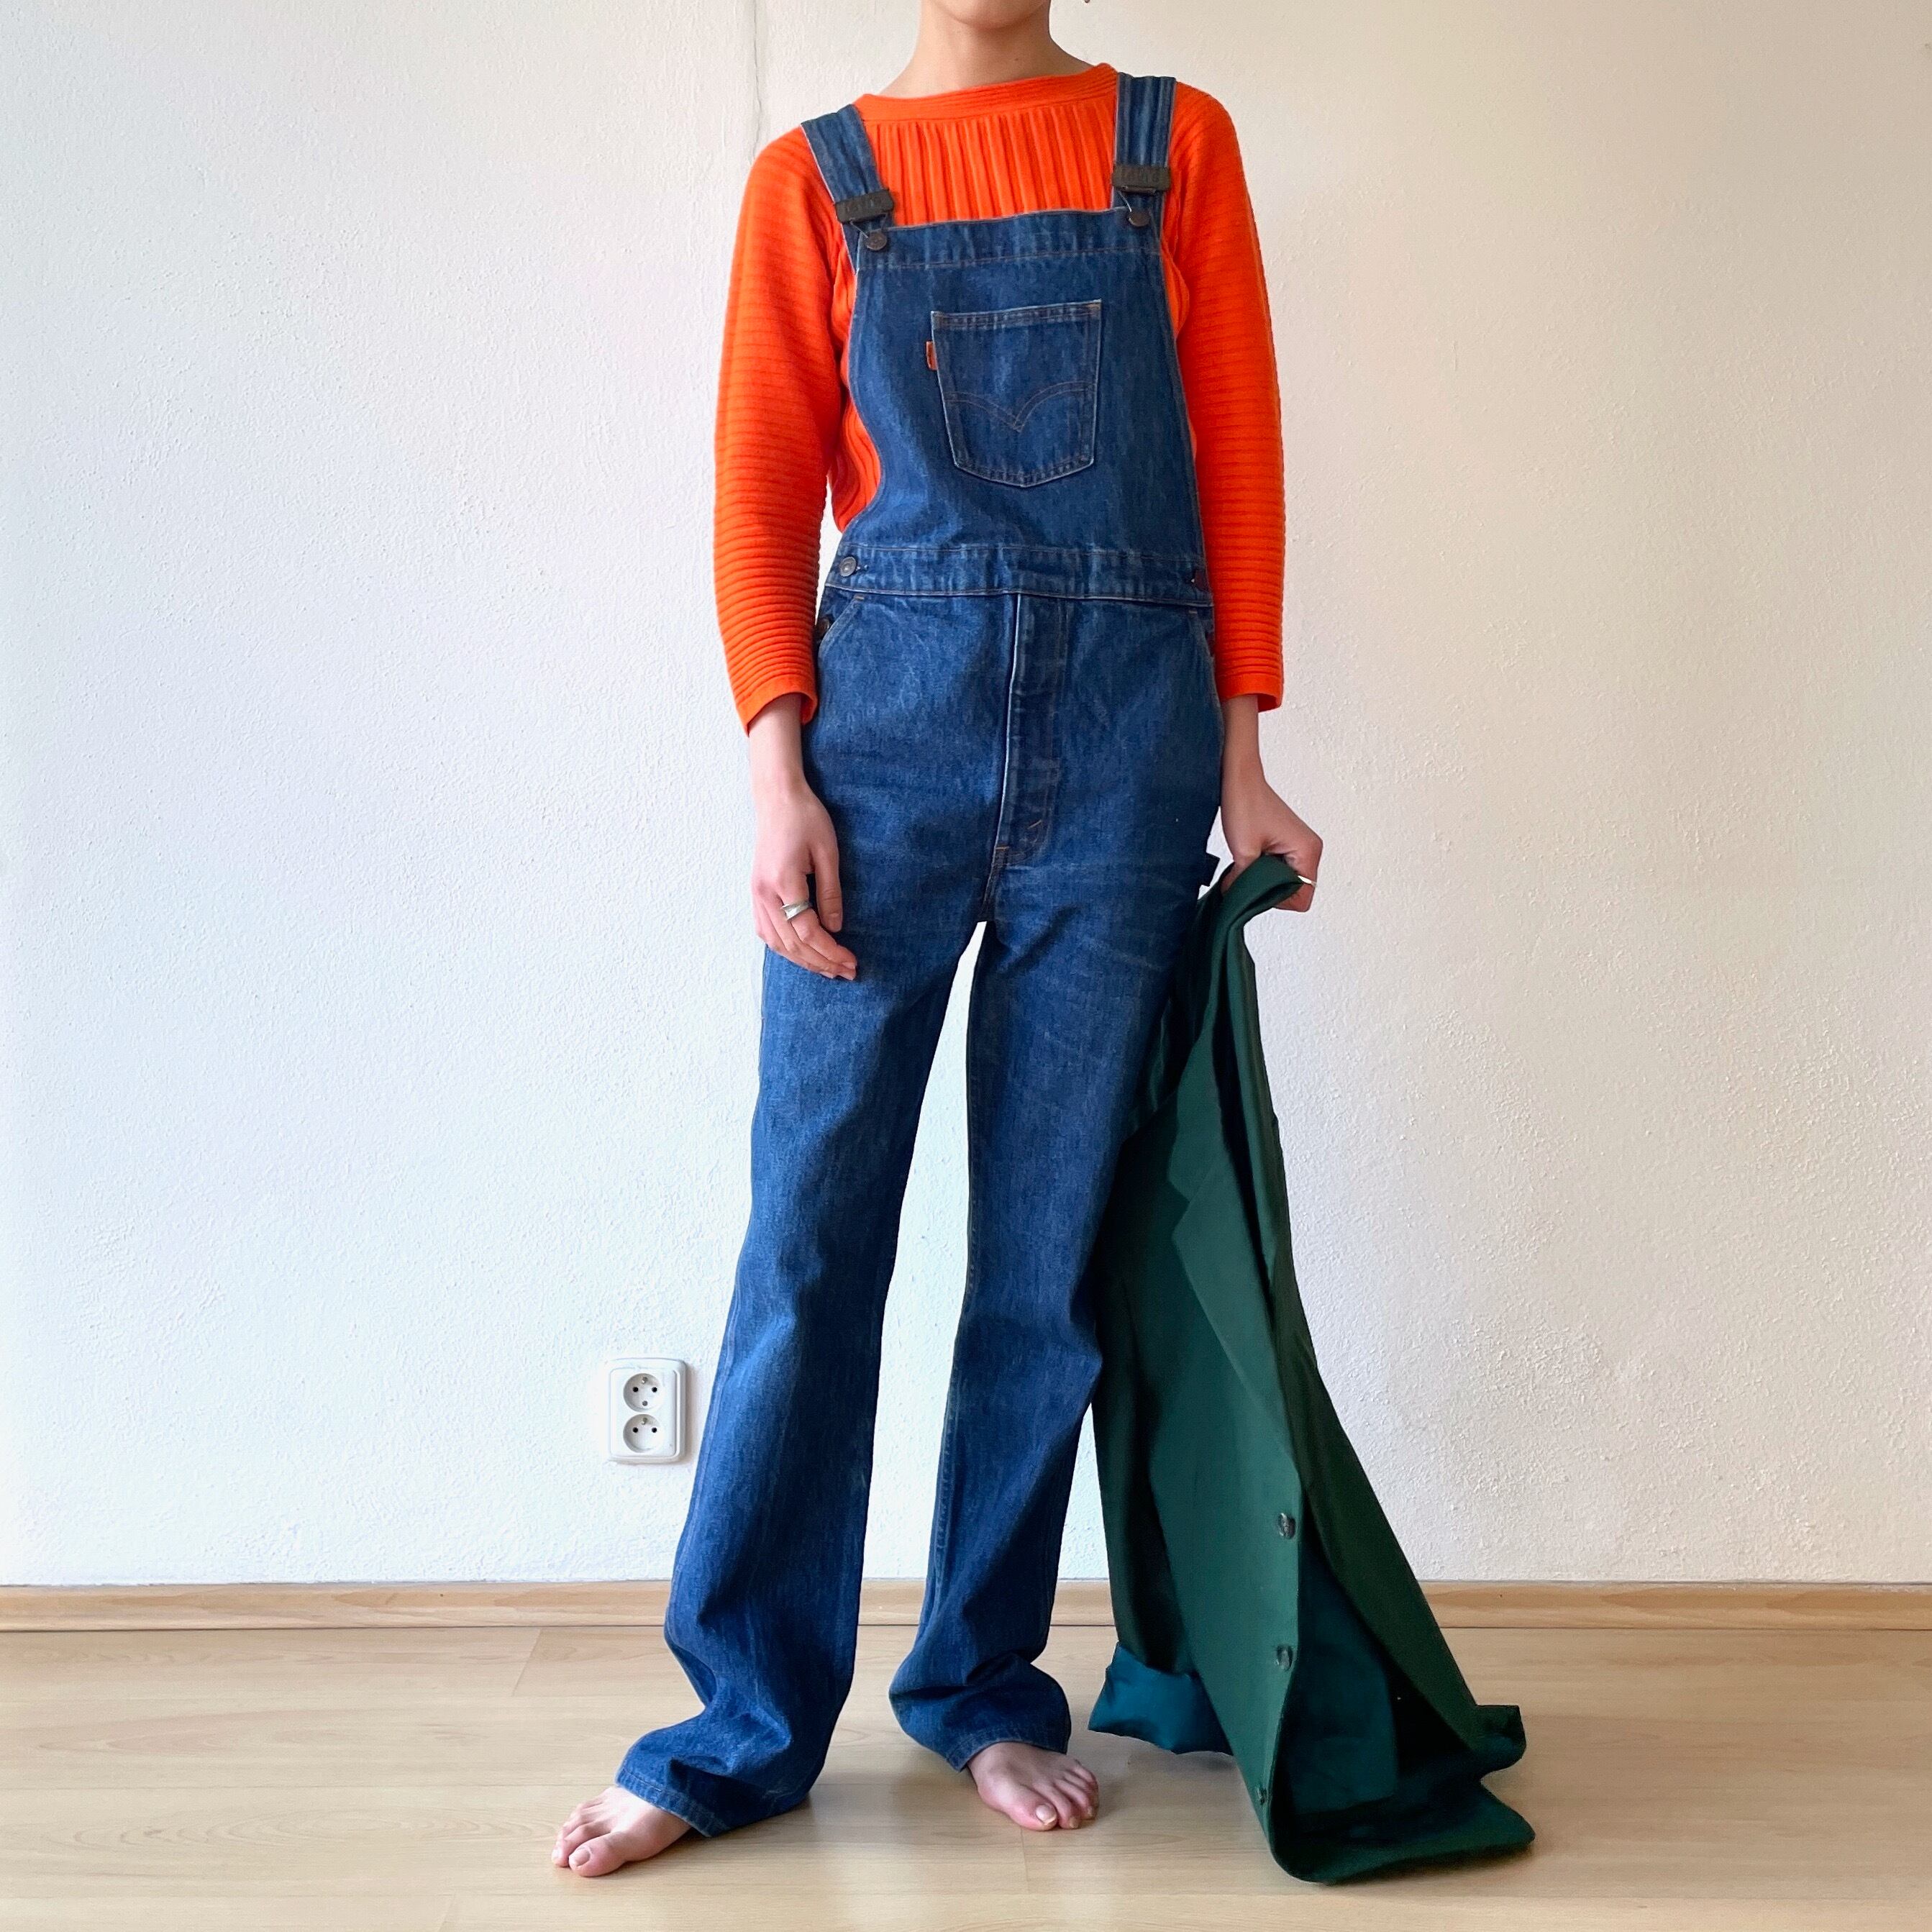 Jump suit / Overall | No Sign